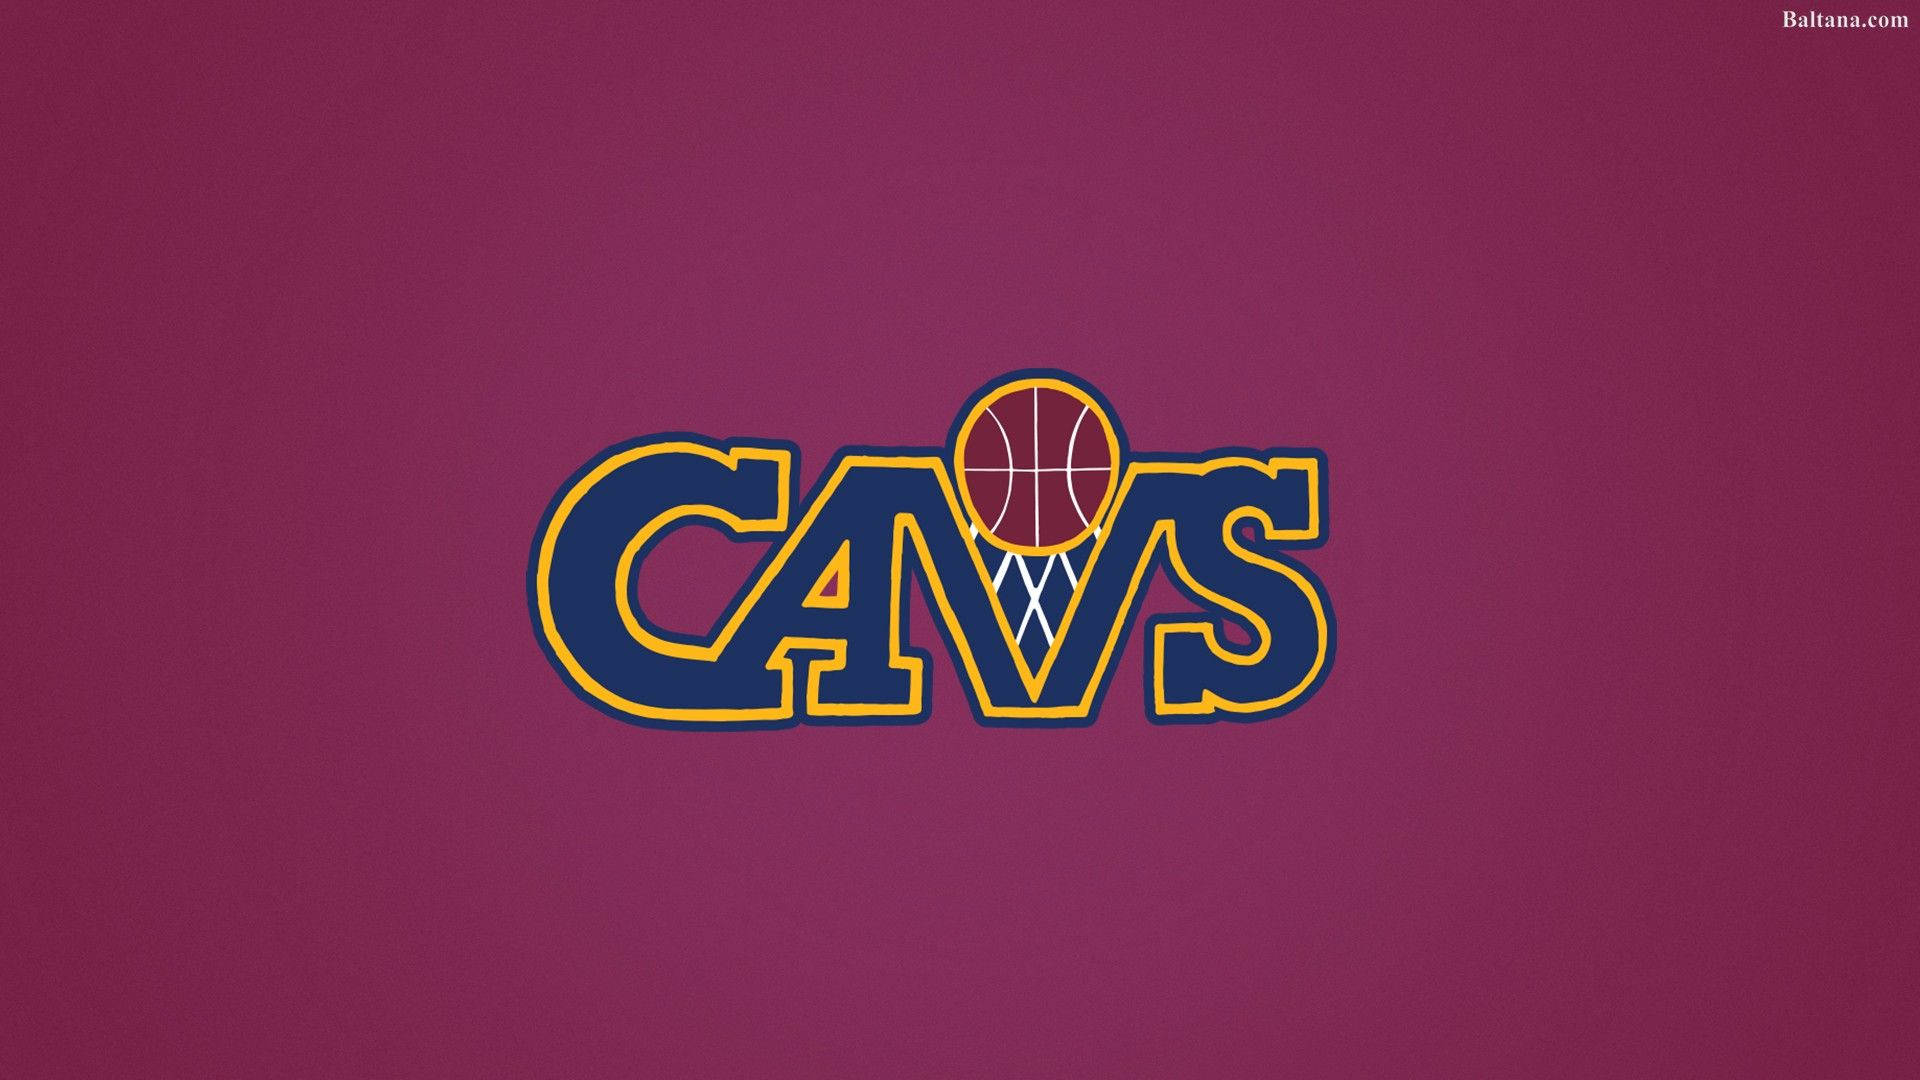 Clevelandcavaliers Ring Logo: Cleveland Cavaliers Ringlogotyp. Wallpaper